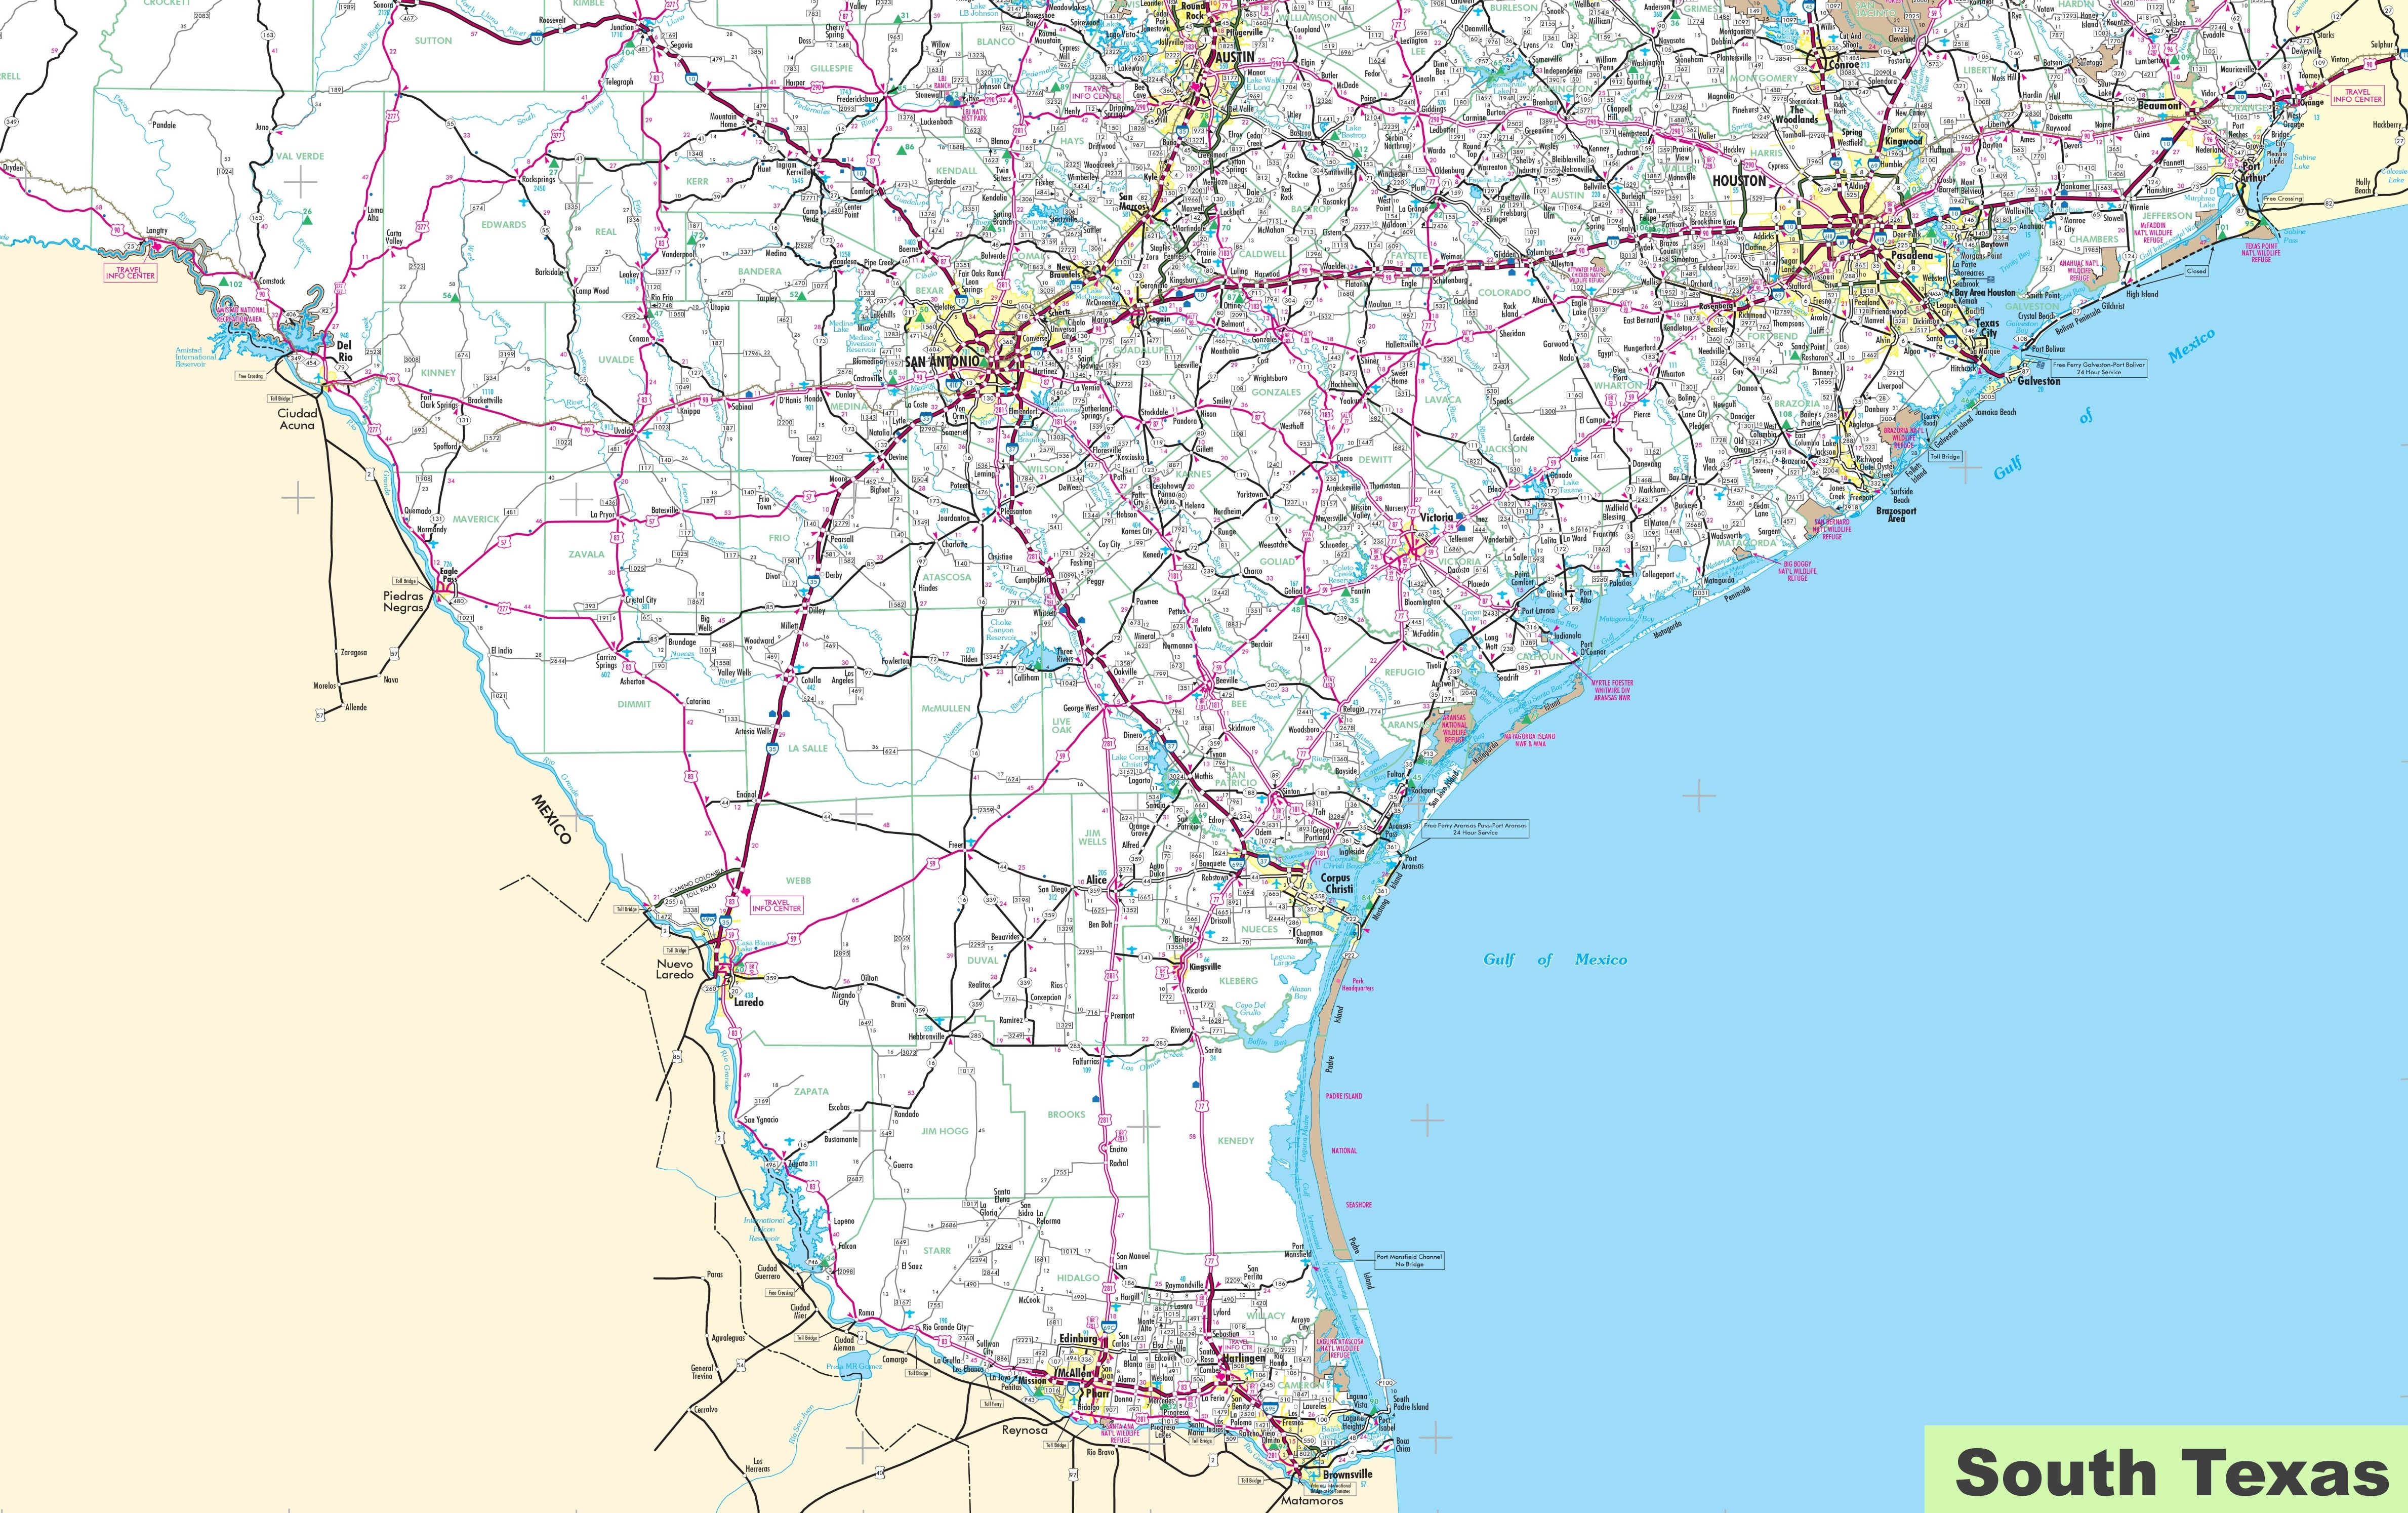 Texas State Maps | Usa | Maps Of Texas (Tx) - South Texas Road Map